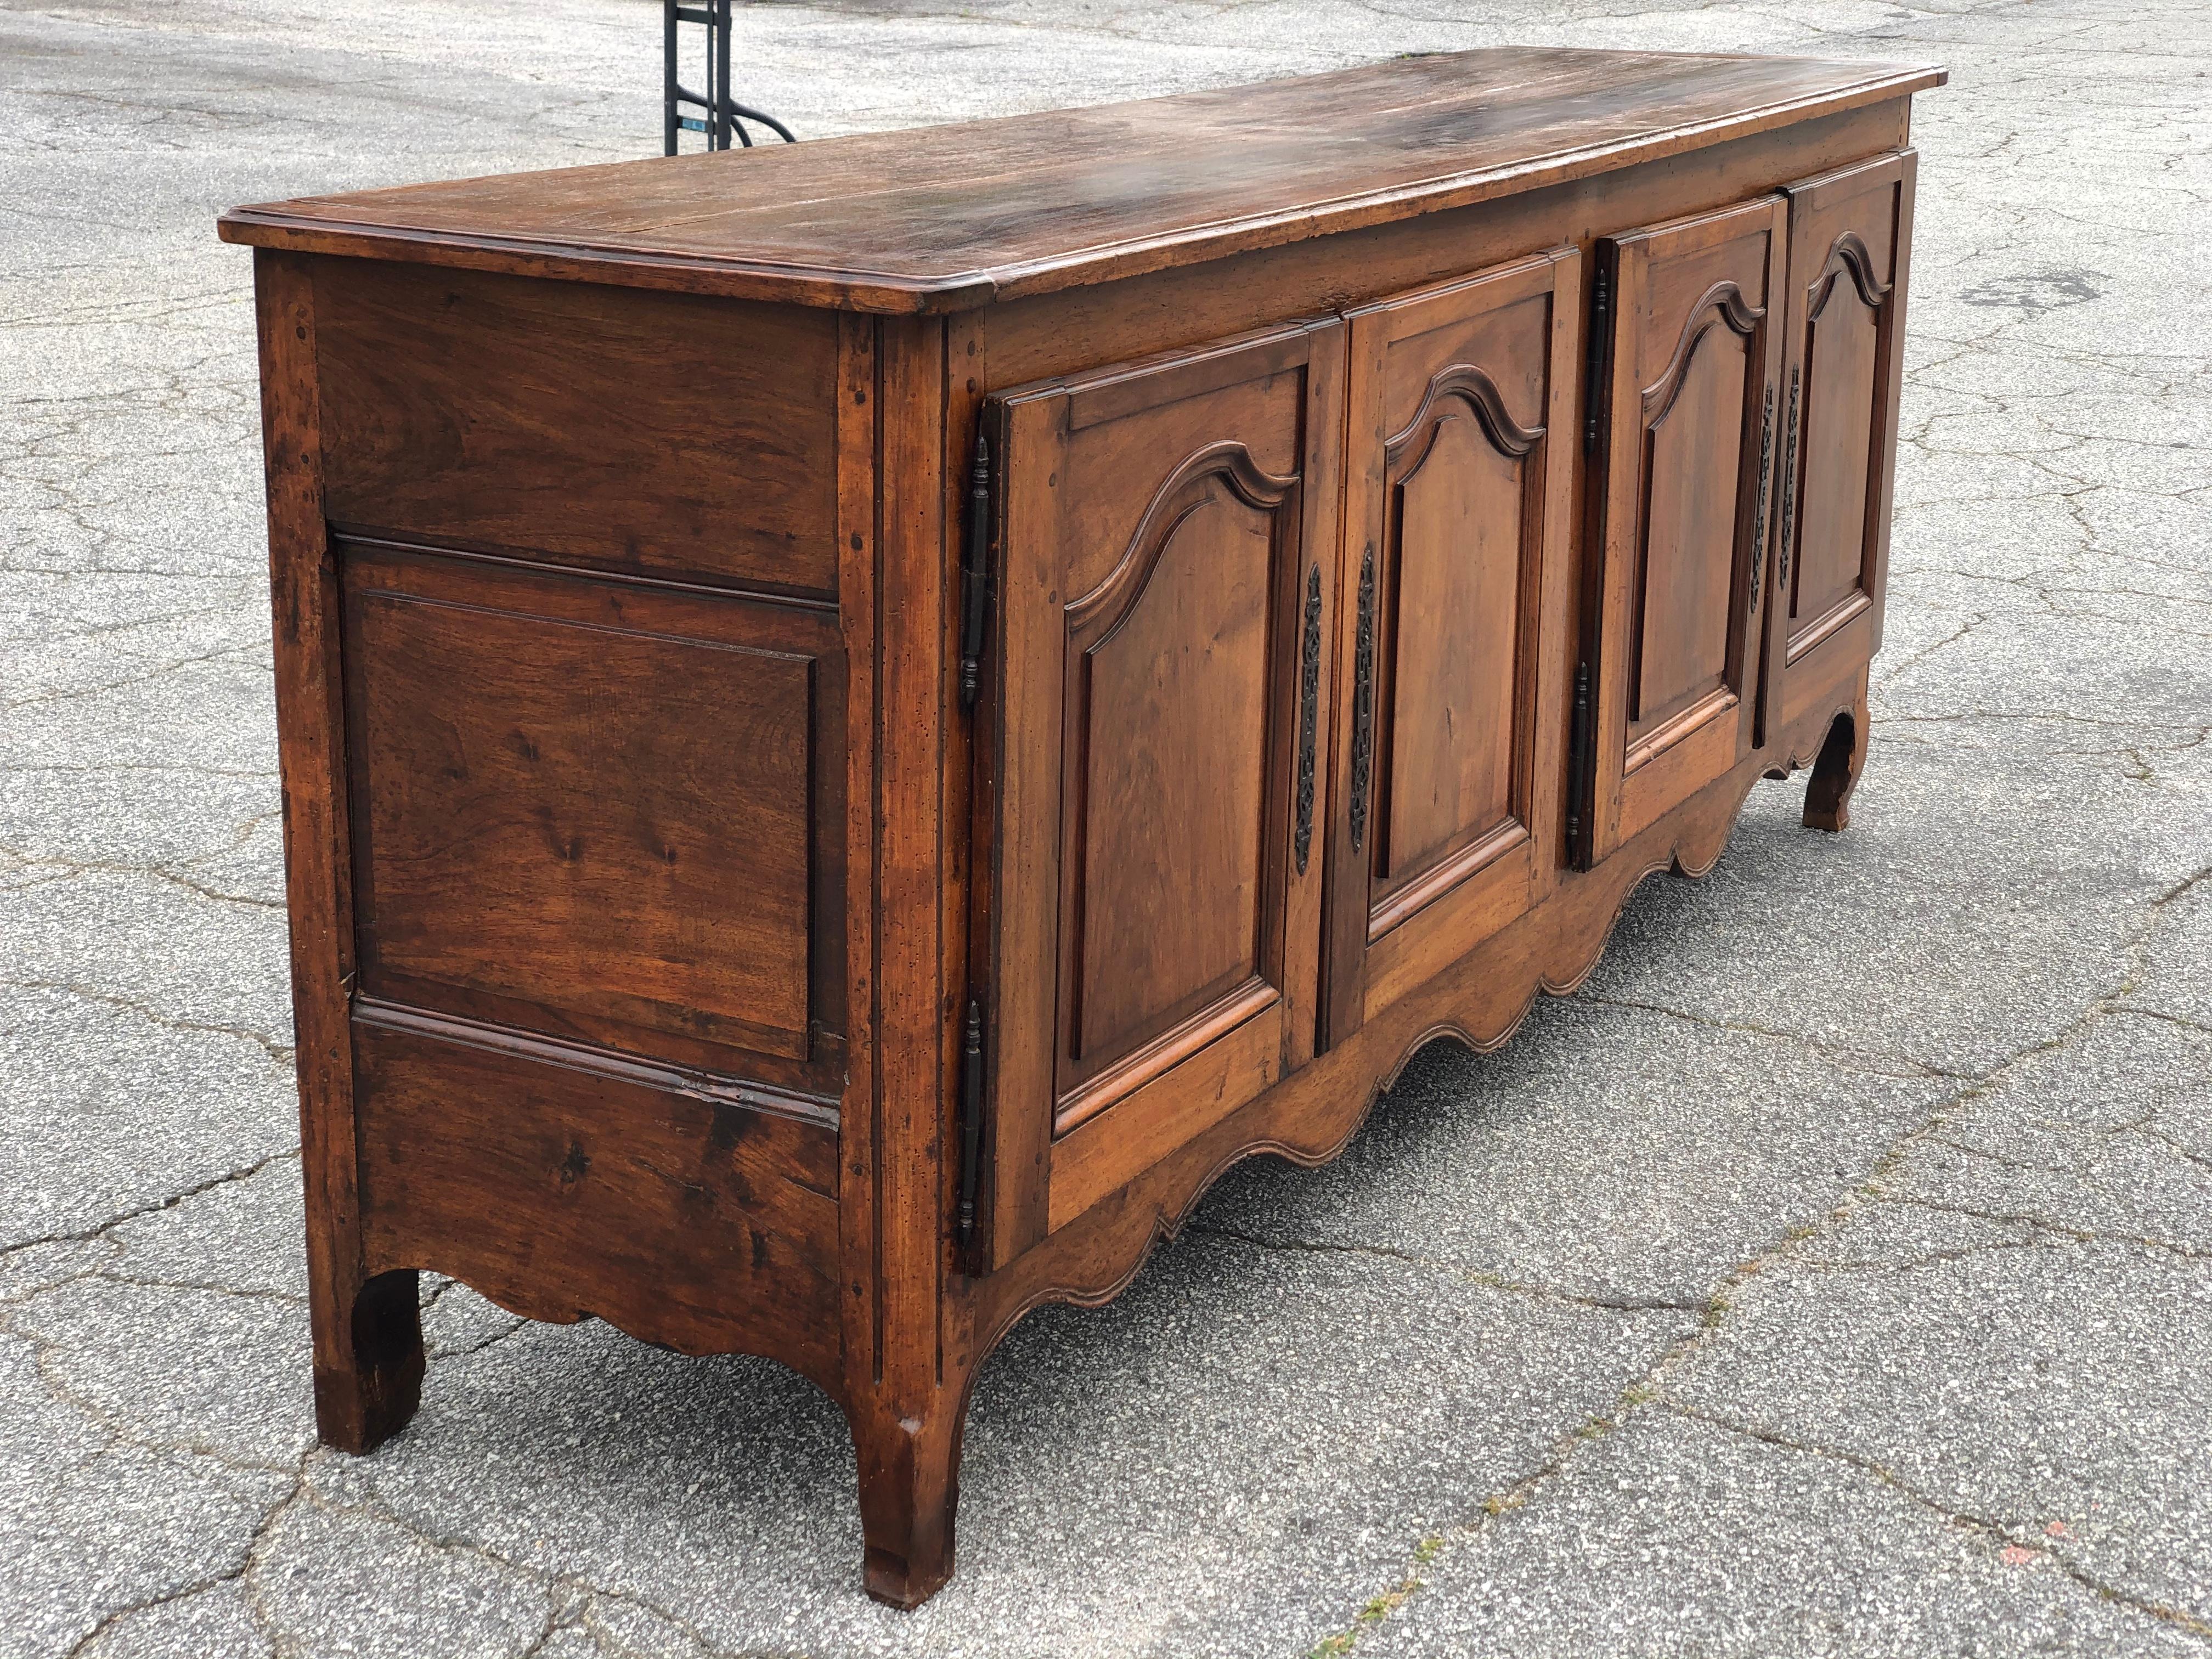 Incredible 18th-19th century French provincial walnut and cherrywood 4 door enfilade. Double pinned mortises throughout, beveled paneled doors, shaped top and carved apron resting on original feet.